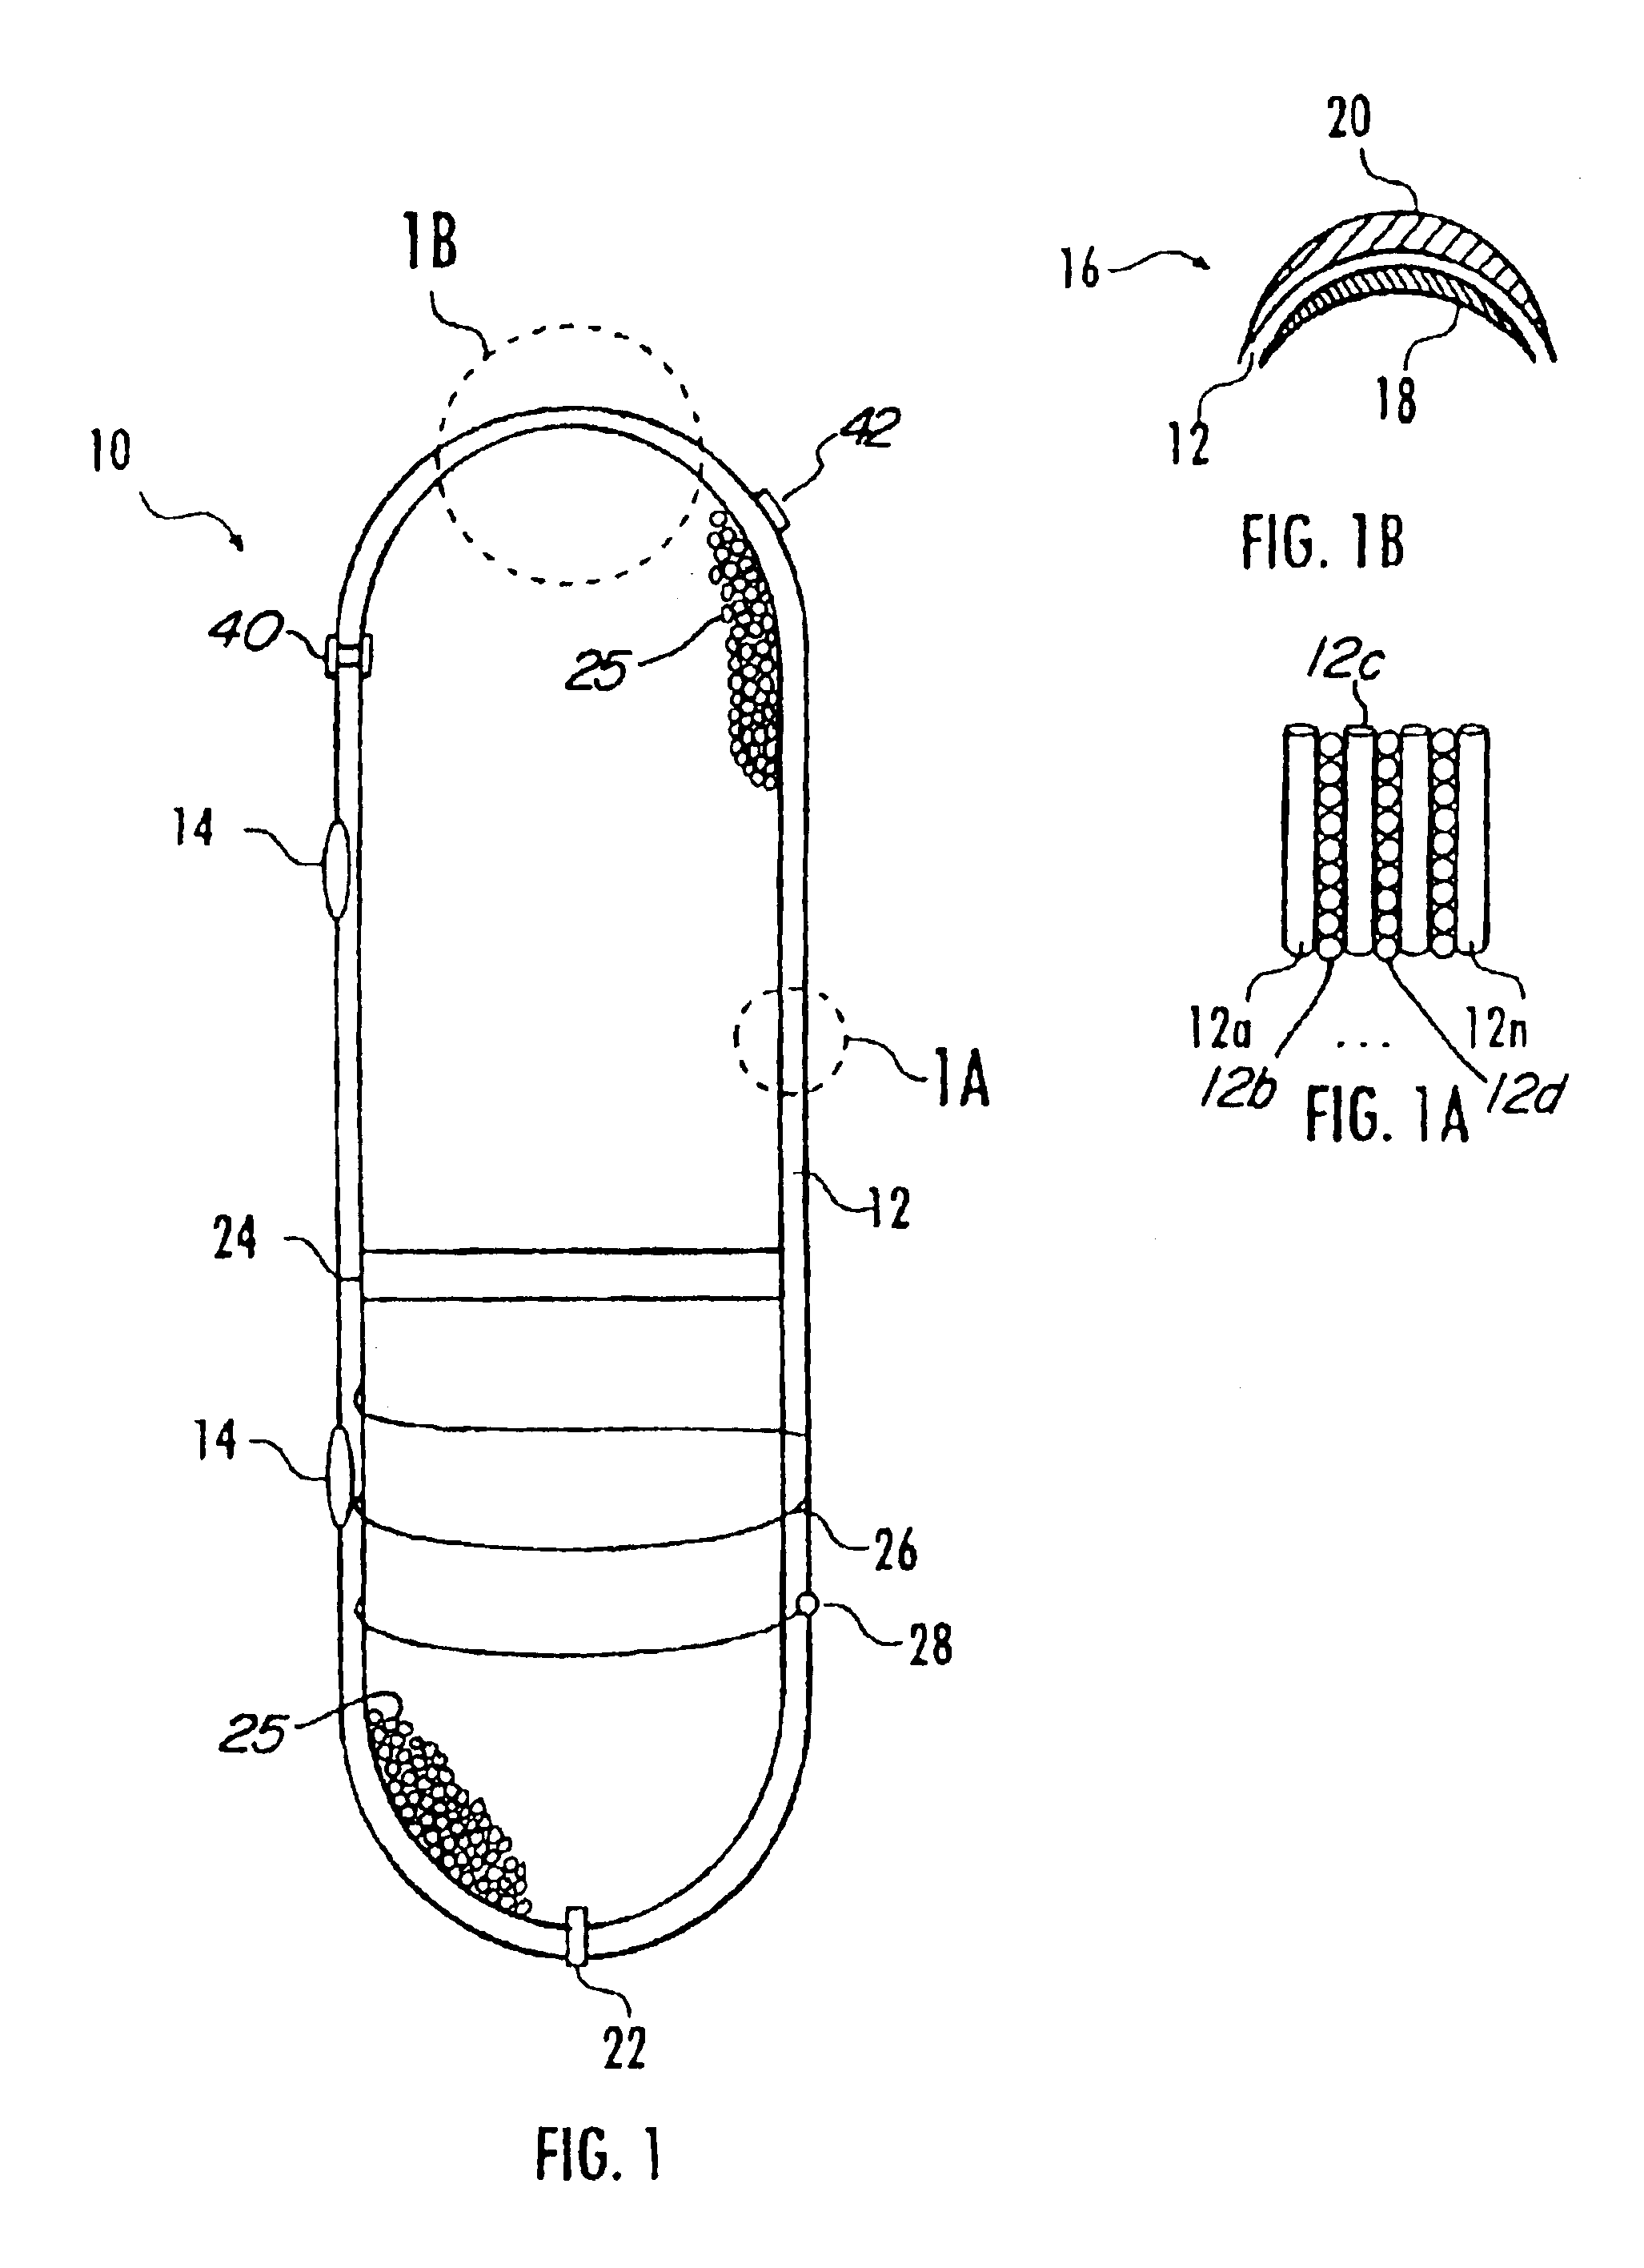 Engineered material buoyancy system and device